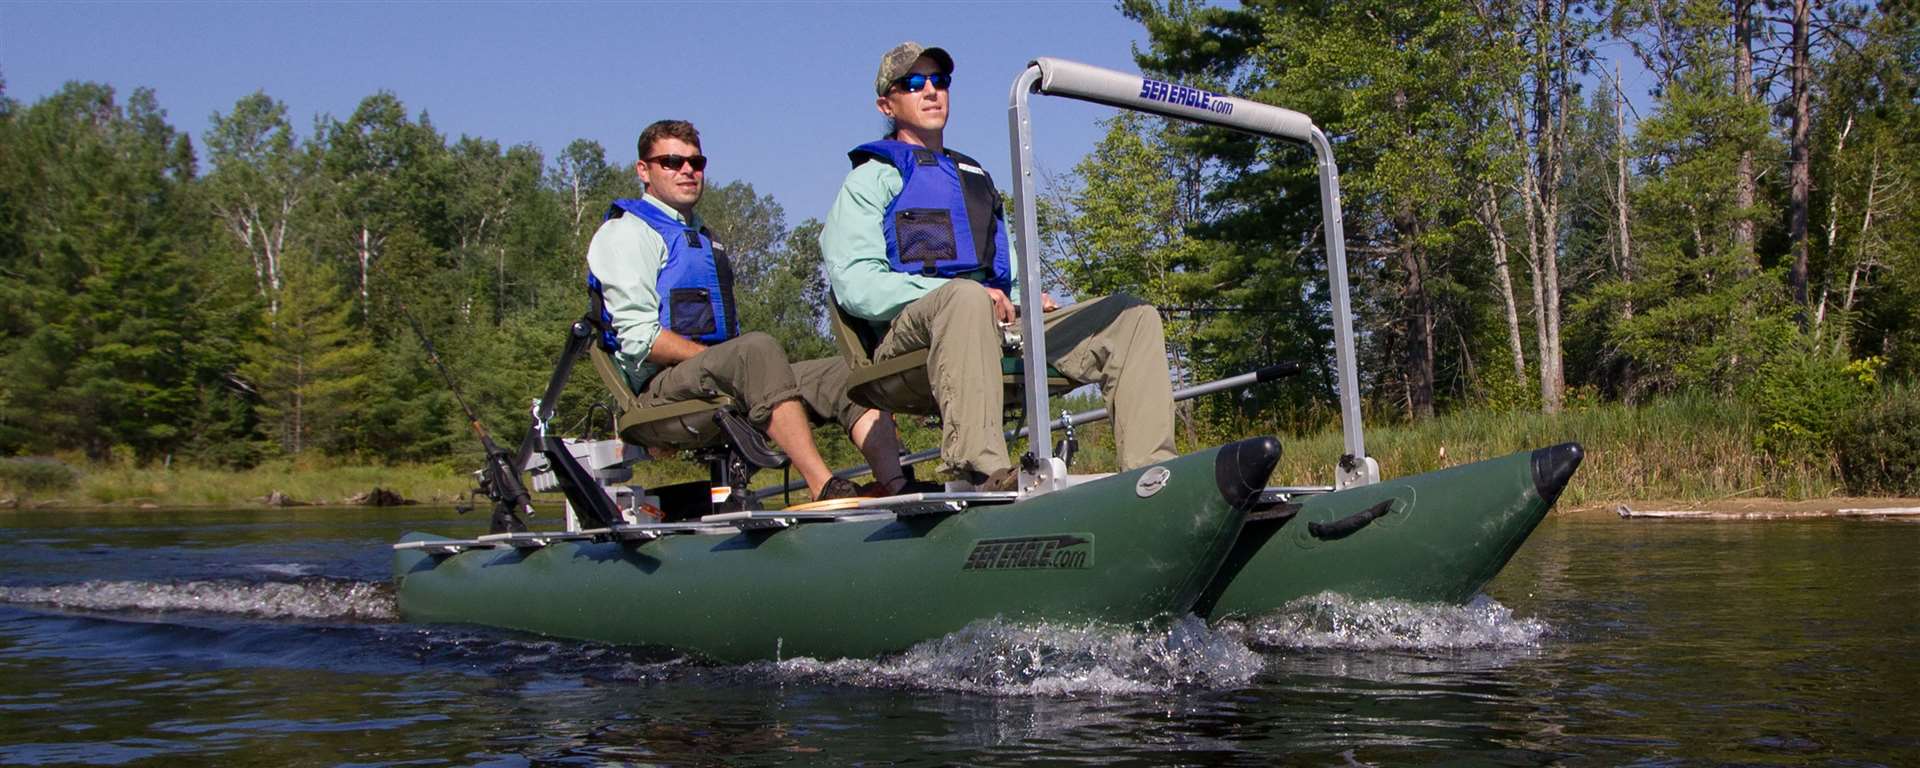 Sea Eagle 375FC FoldCat Inflatable Fishing Boat - Deluxe Package